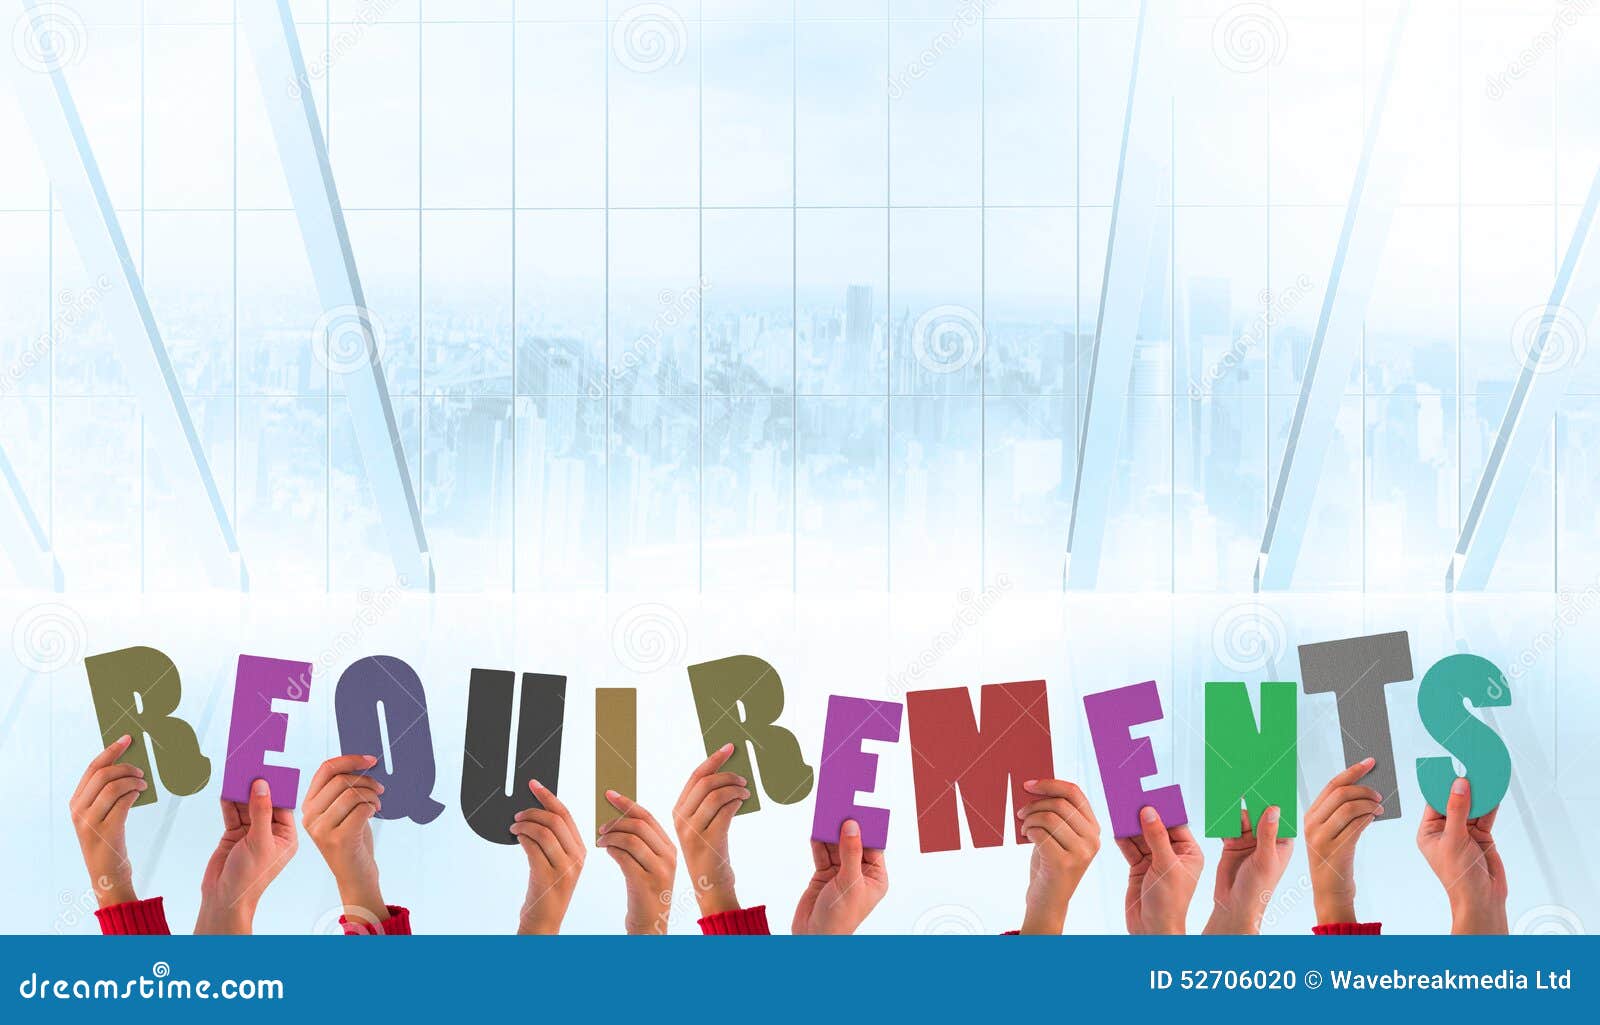 composite image of hands holding up requirements